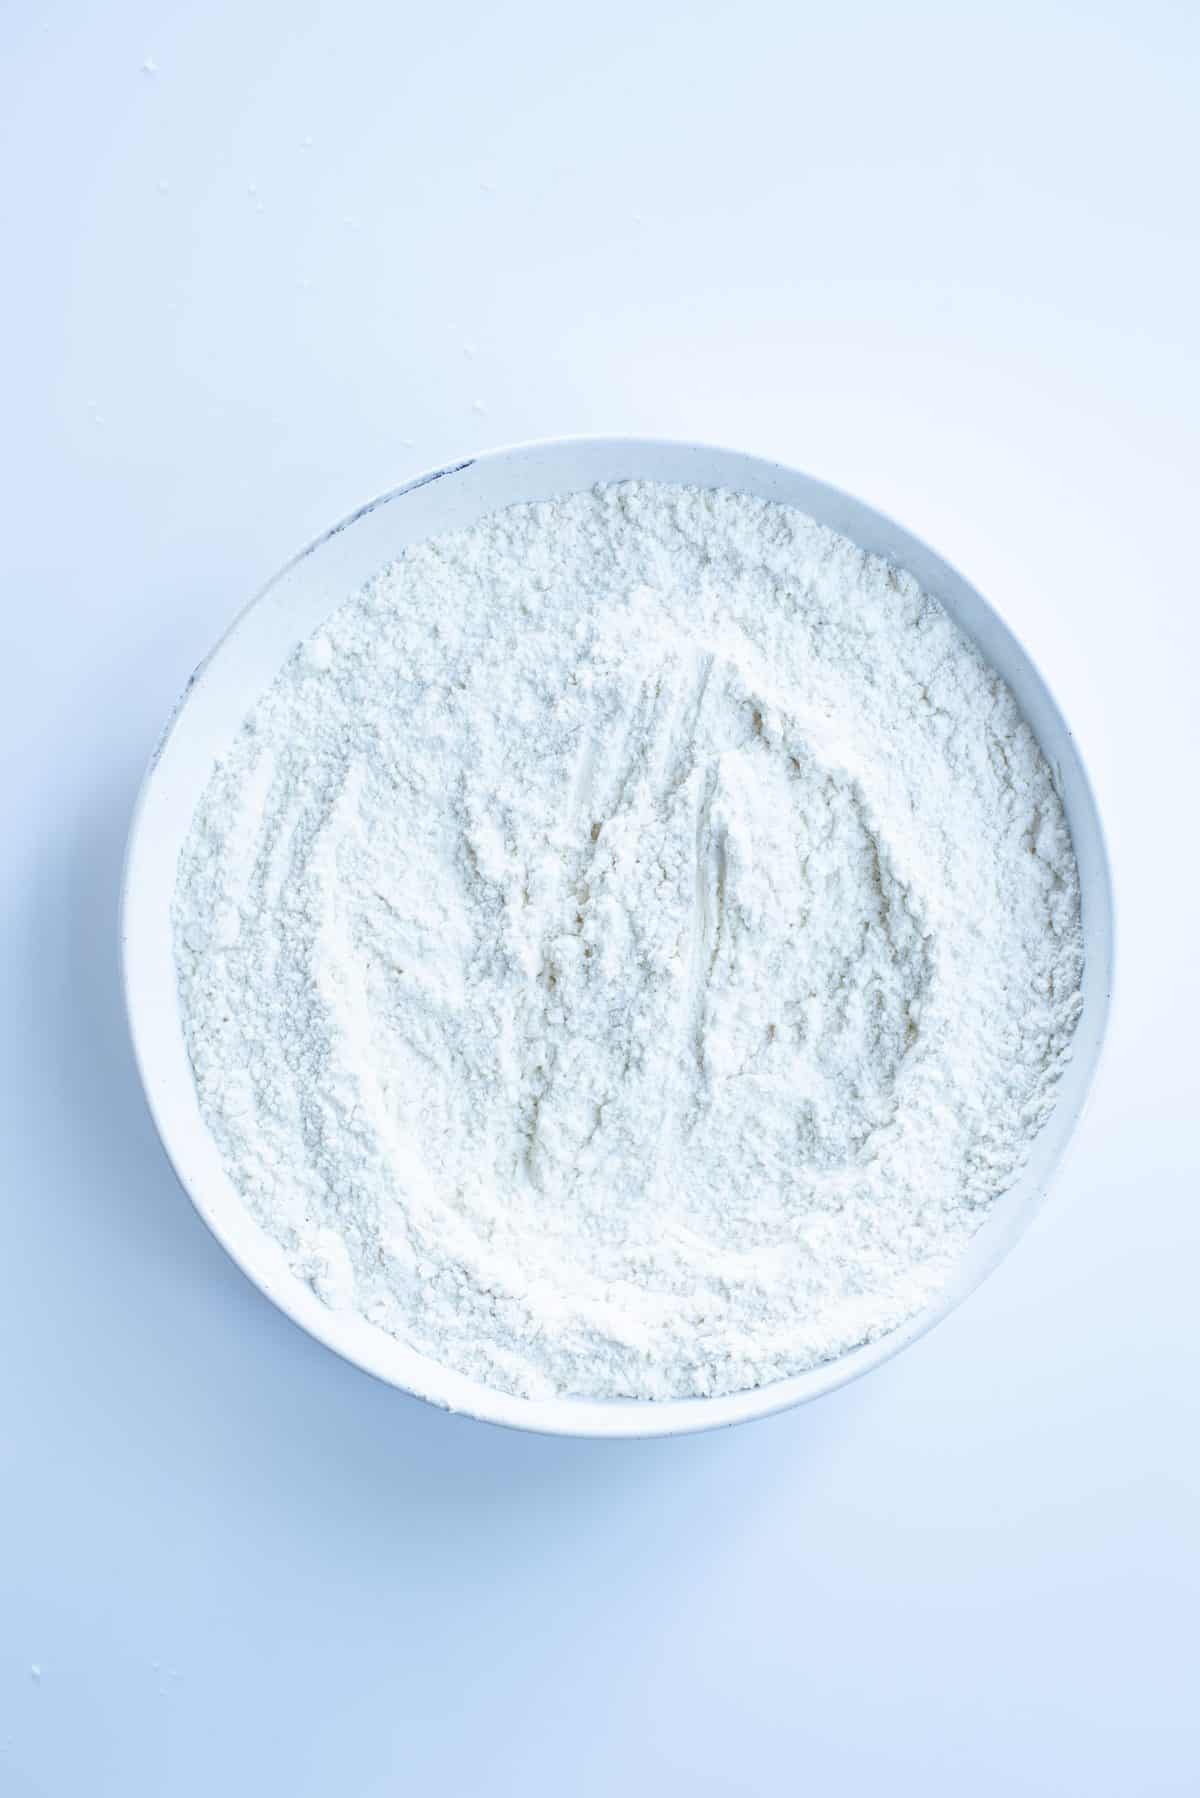 the dry flour mixture in large white bowl on white background. 